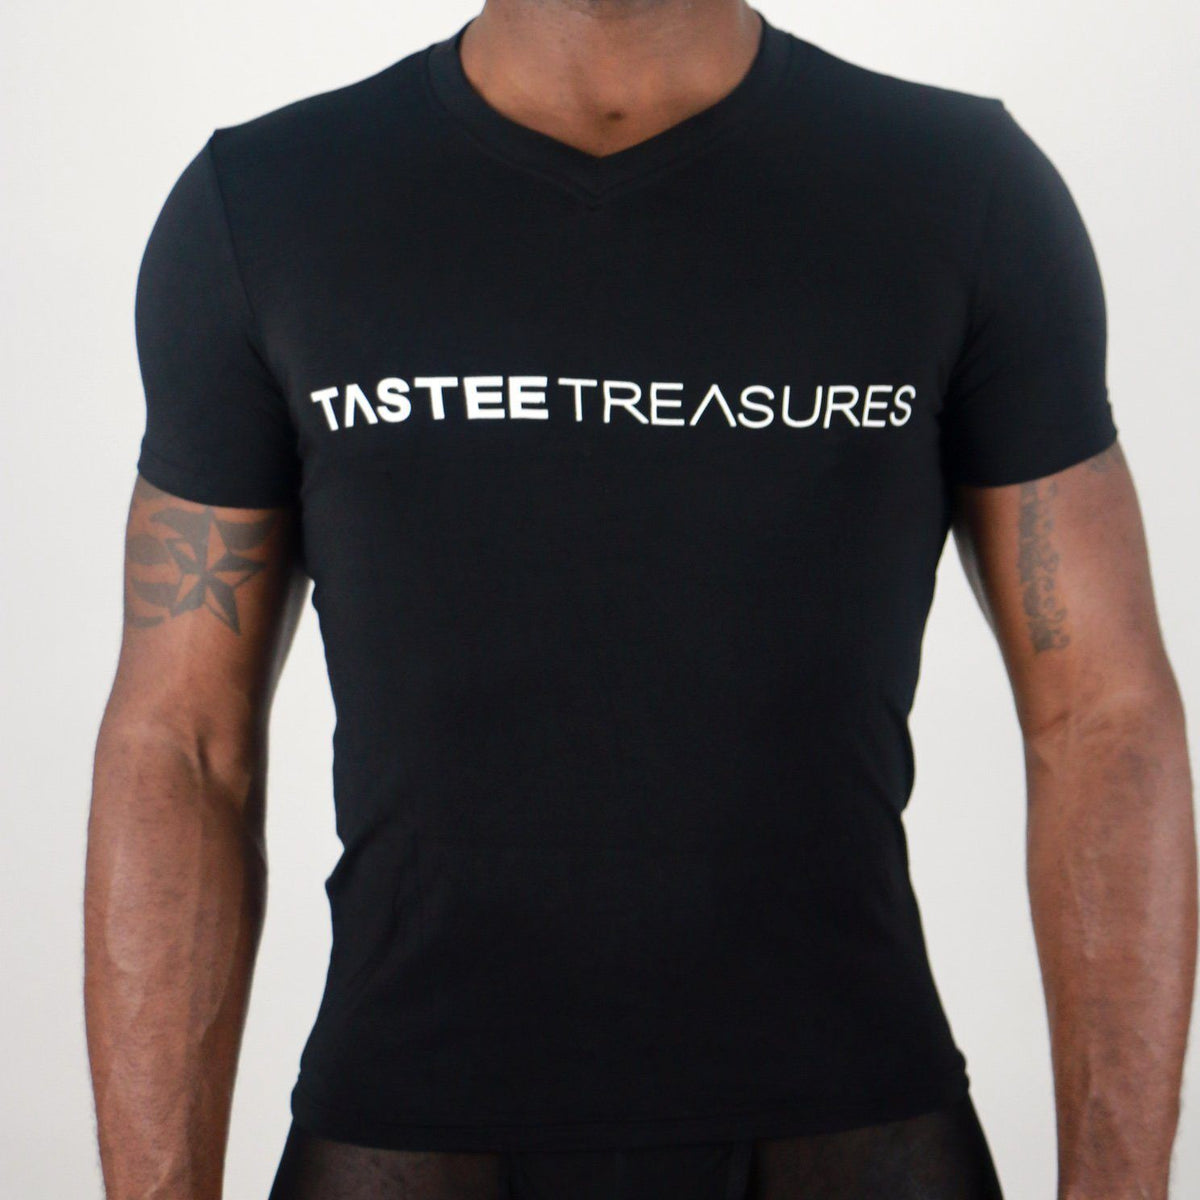 Plush Fitted V Neck Tops and Shirts TasteeTreasures 